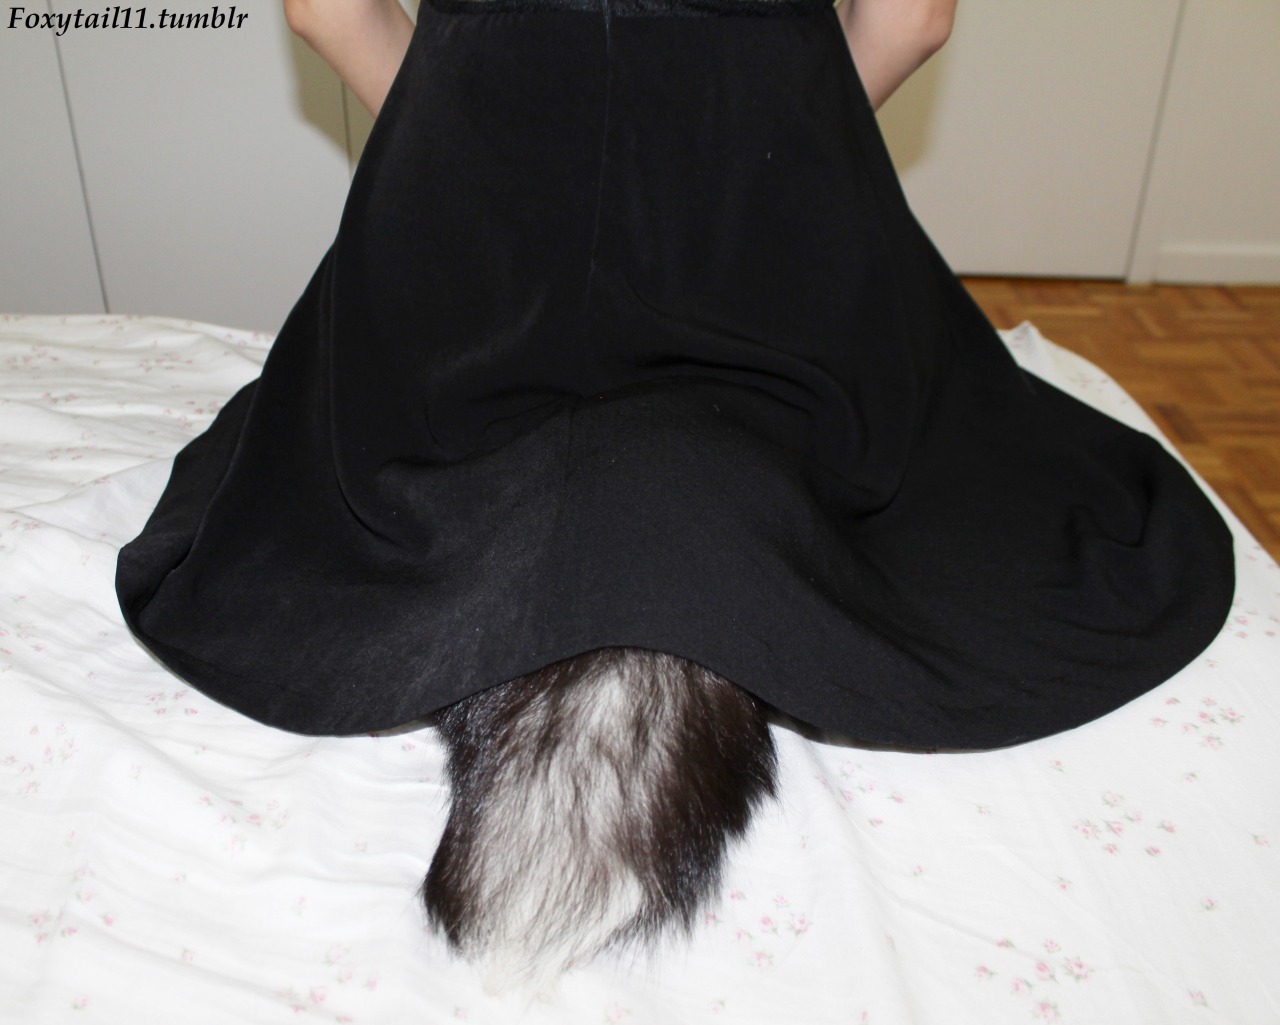 My fox tail peeping out of my dress hehe.  It was a fun night at the masquerade